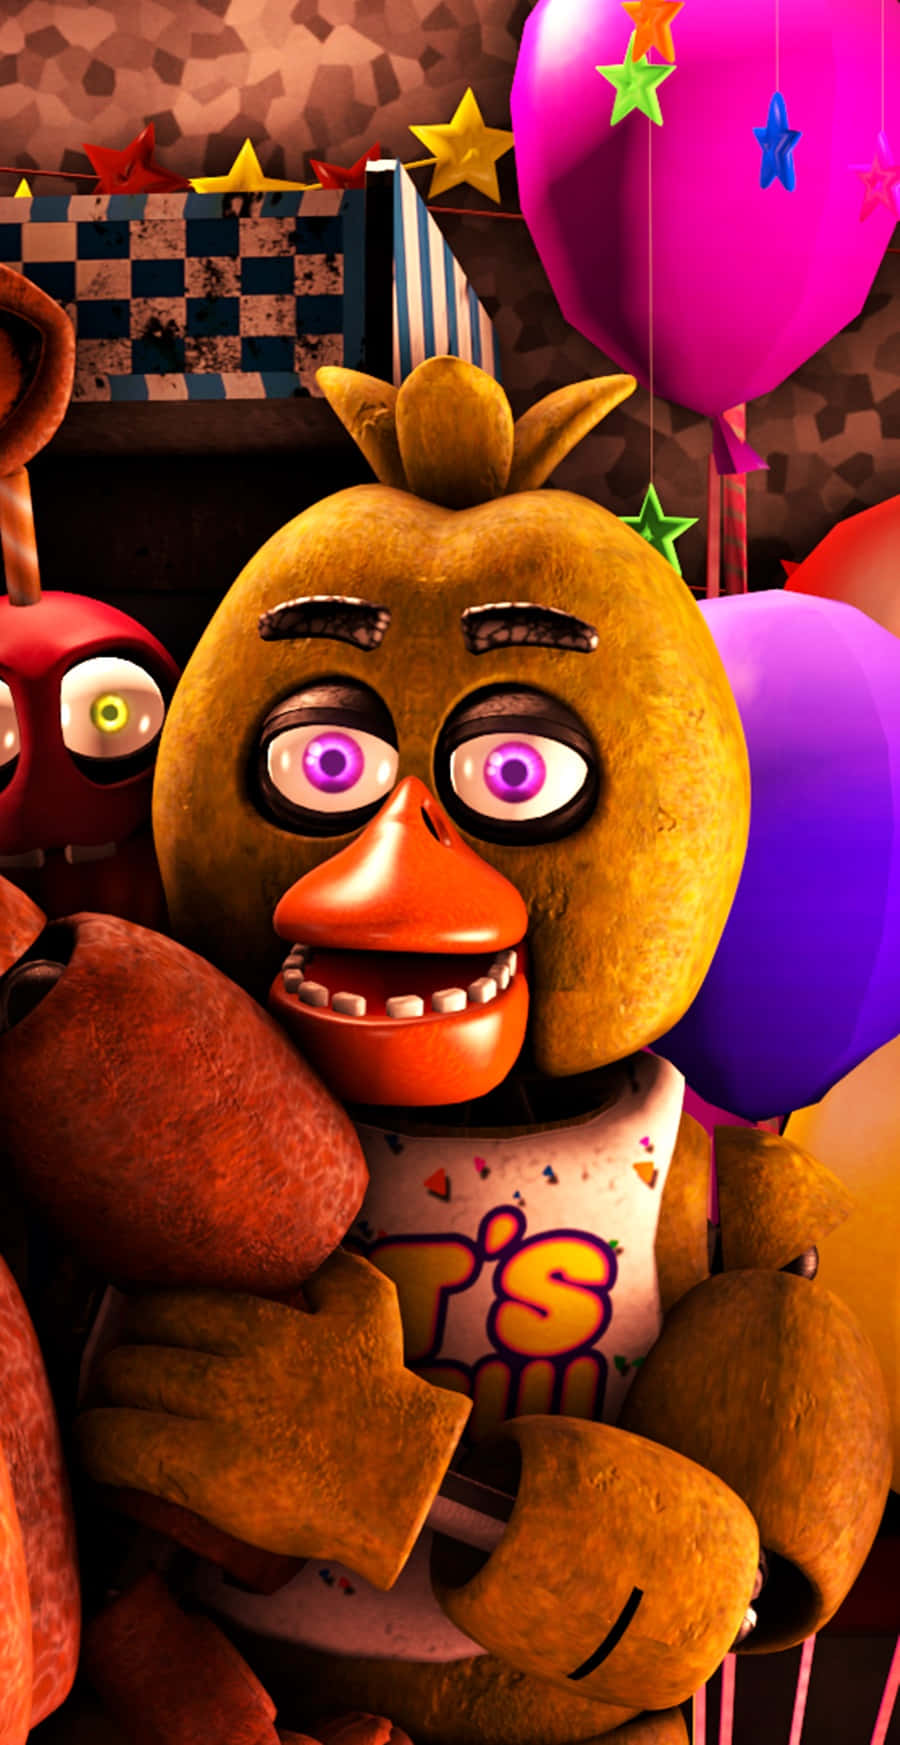 How to Download Five Nights At Anime On iOS